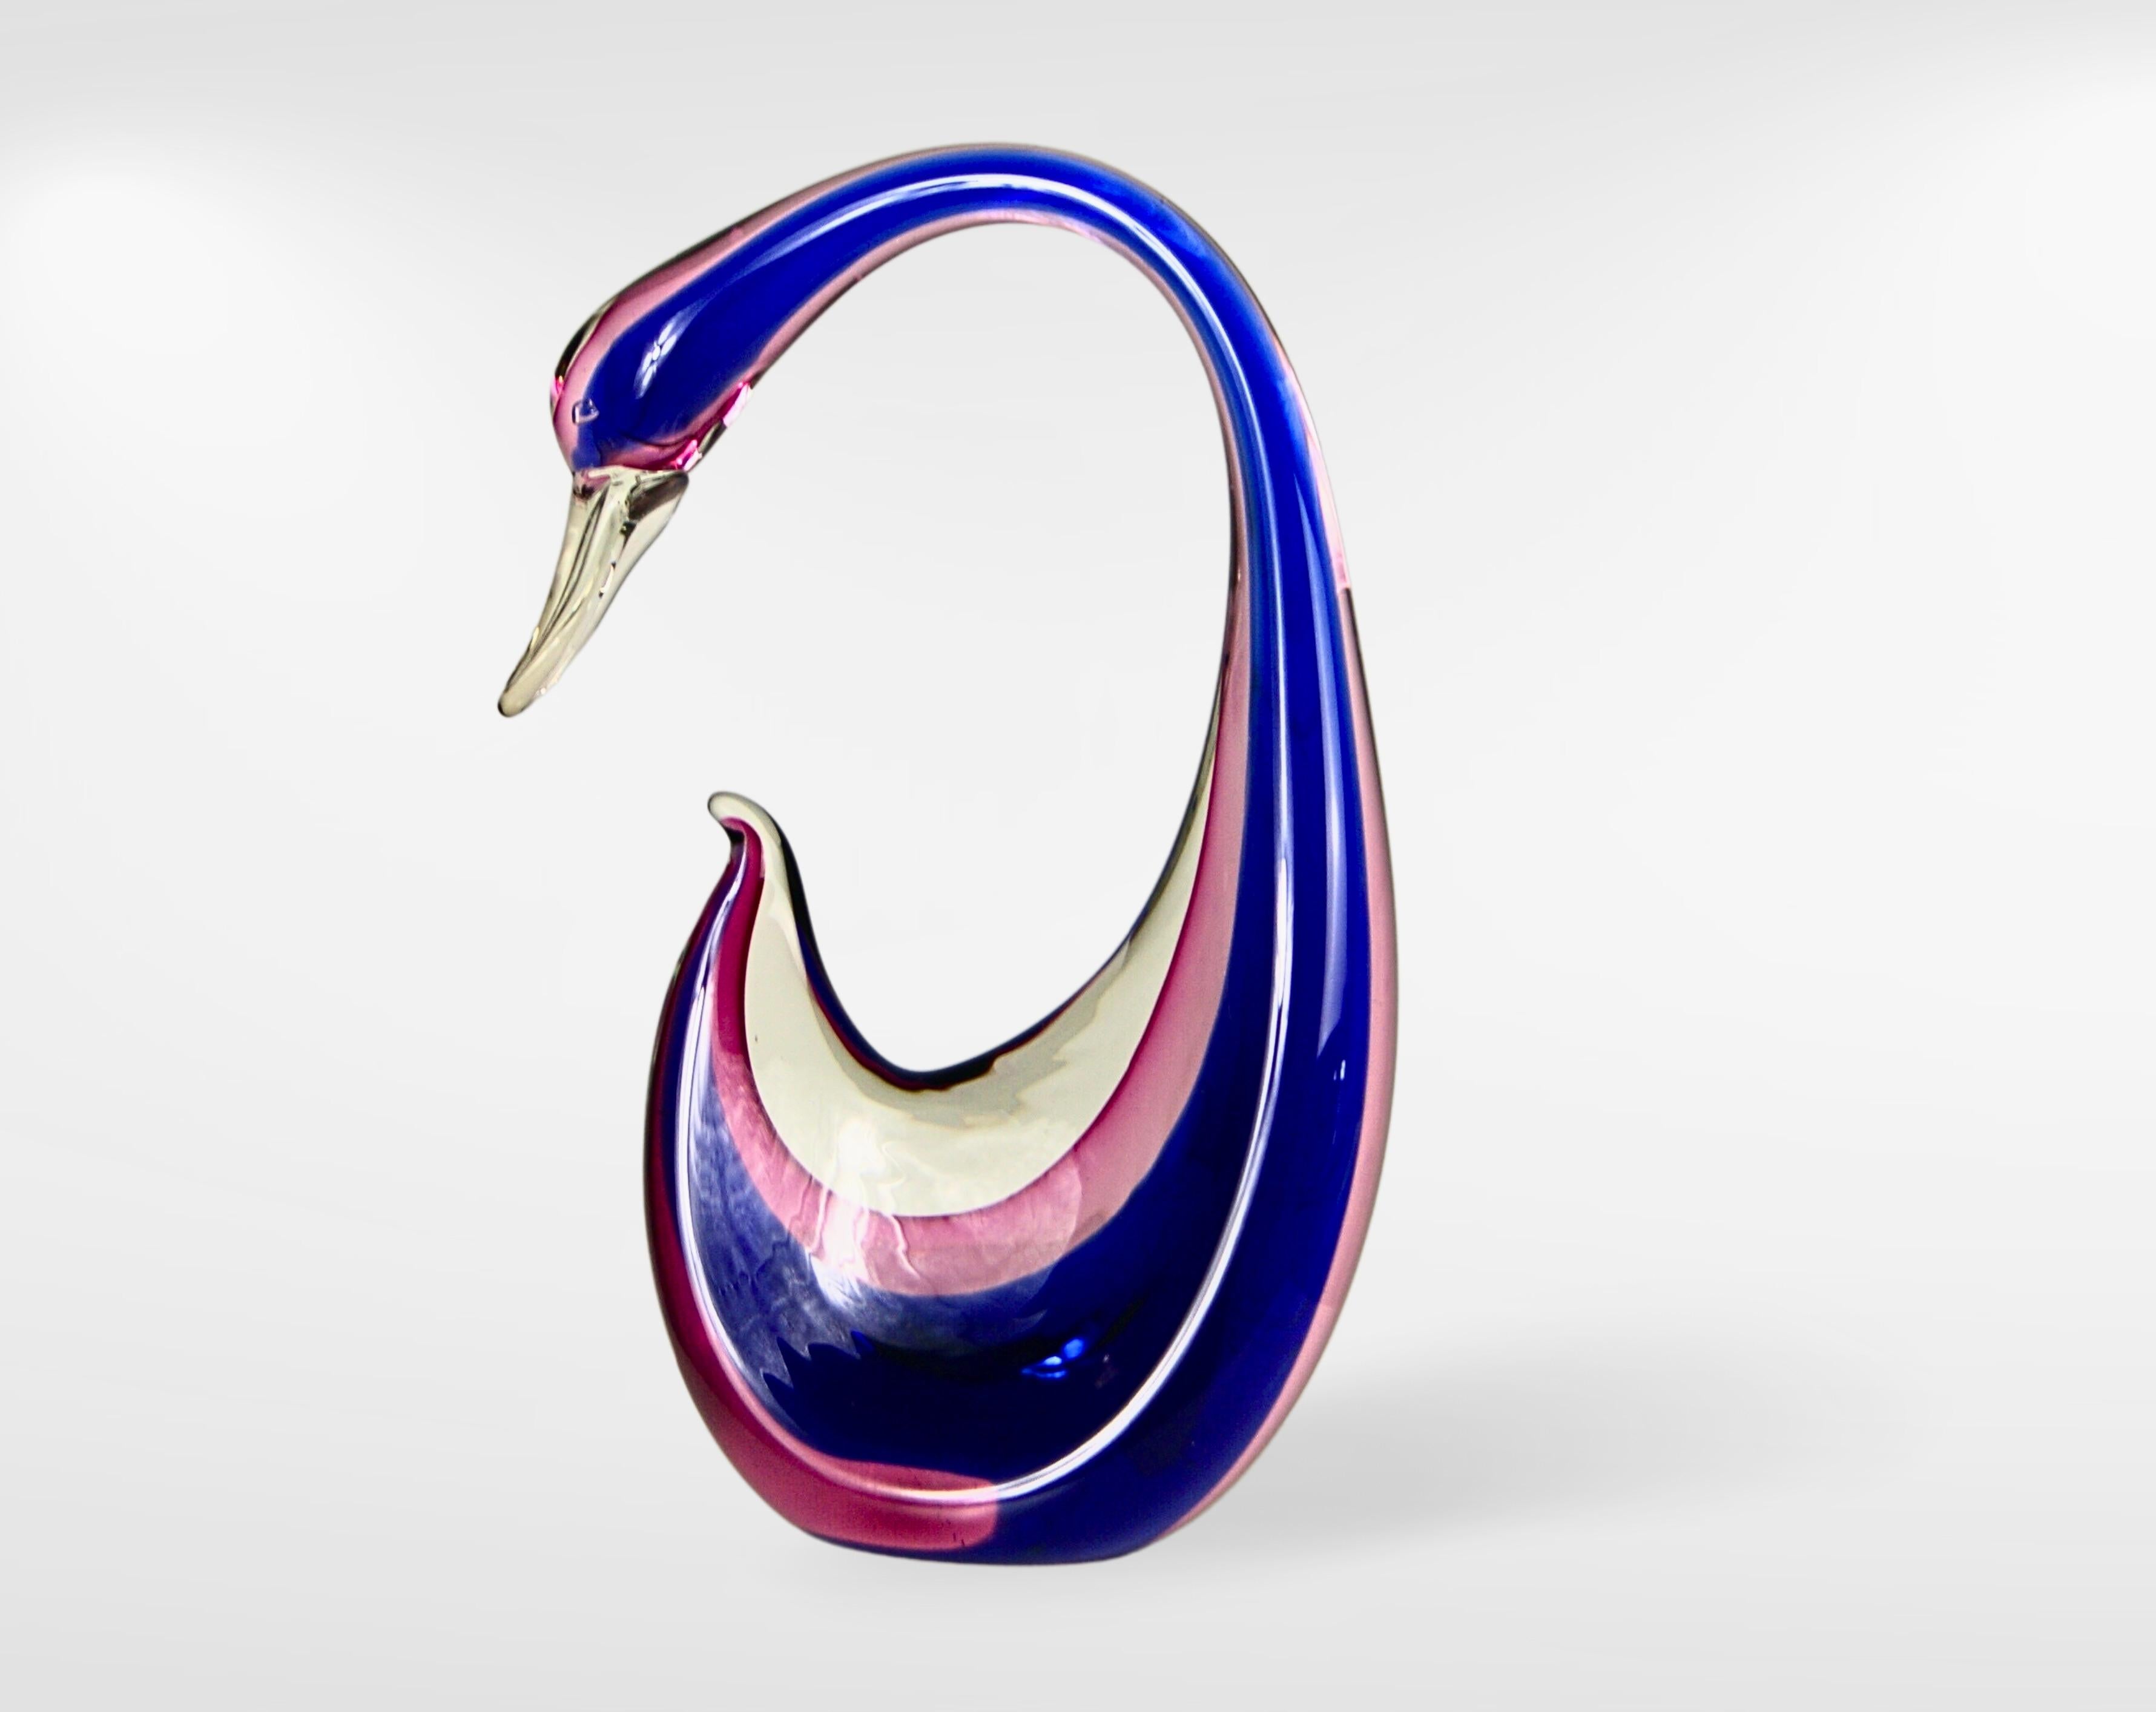 Midcentury Murano Sommerso Glass Large Swan Sculpture.
Attributed to Flavio Poli for Seguso.
Gorgeous Swan with elegant crested long neck.
Submerged glass sculpture, intricately layered in striking gradient shades of purple and pink.
Large and